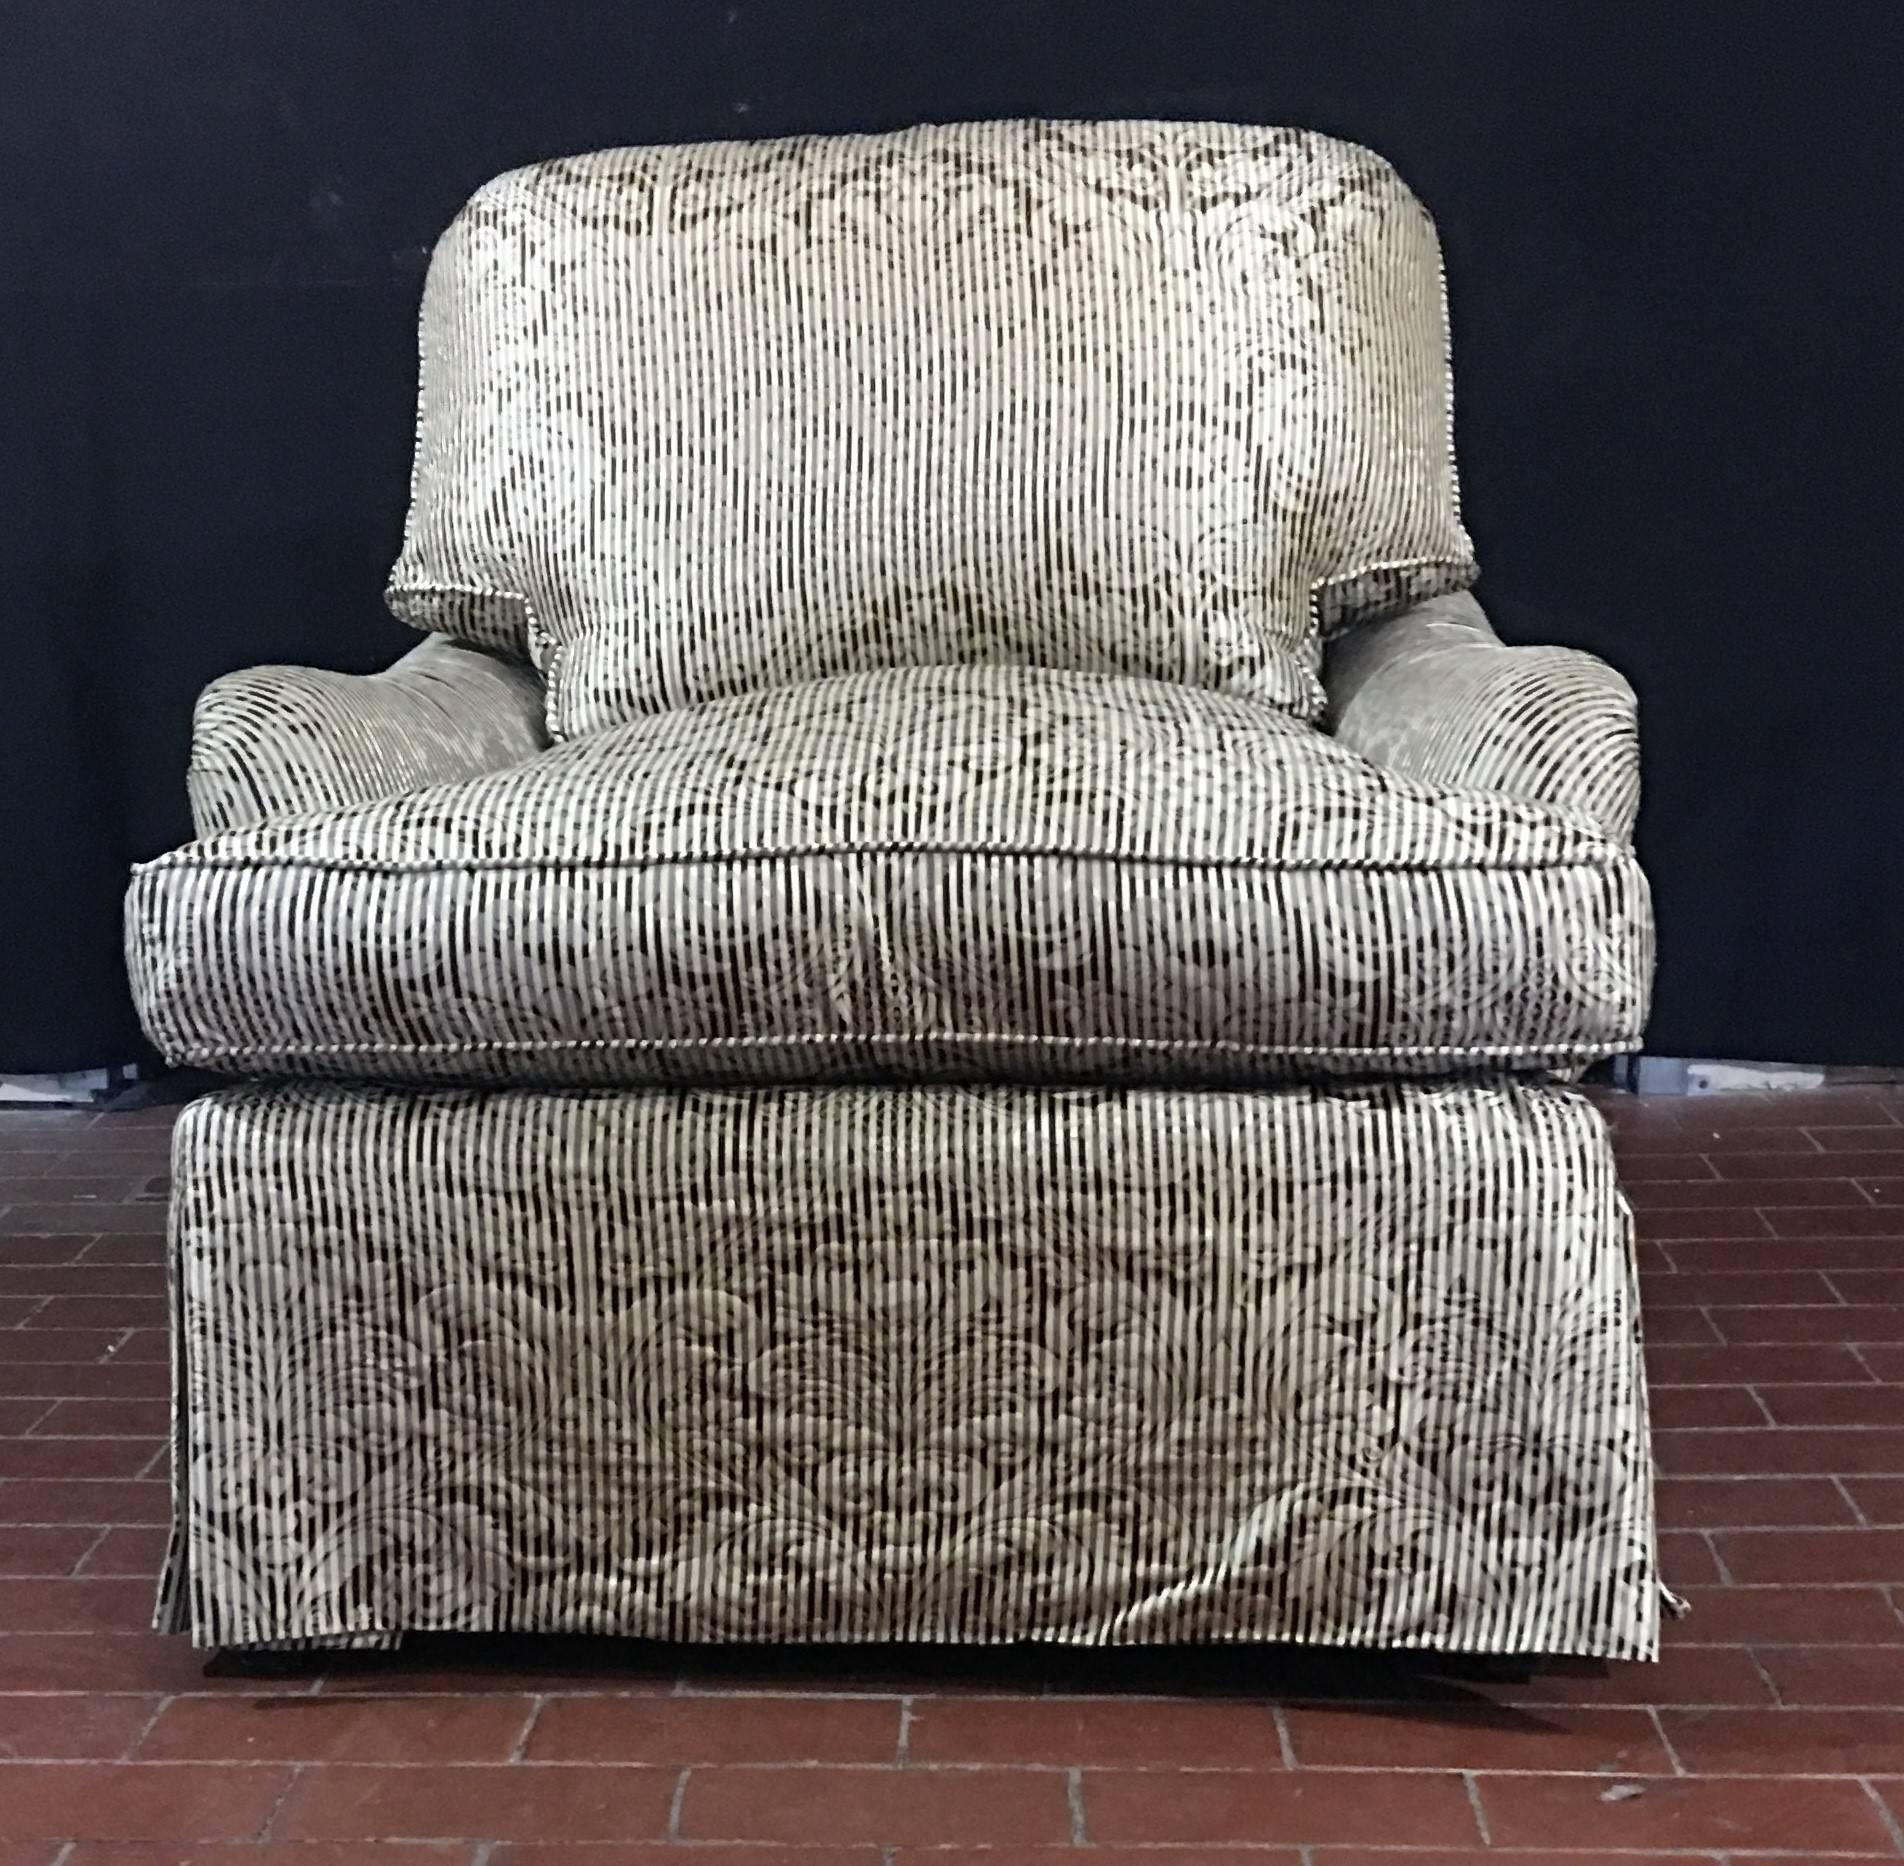 Elegant, luxurious pair of Bridgewater style club chairs. Made of the finest construction and composition, these chairs are made with a solid, hardwood frame and 8 way-hand tied spring construction. They are shown in a beautiful silver and charcoal